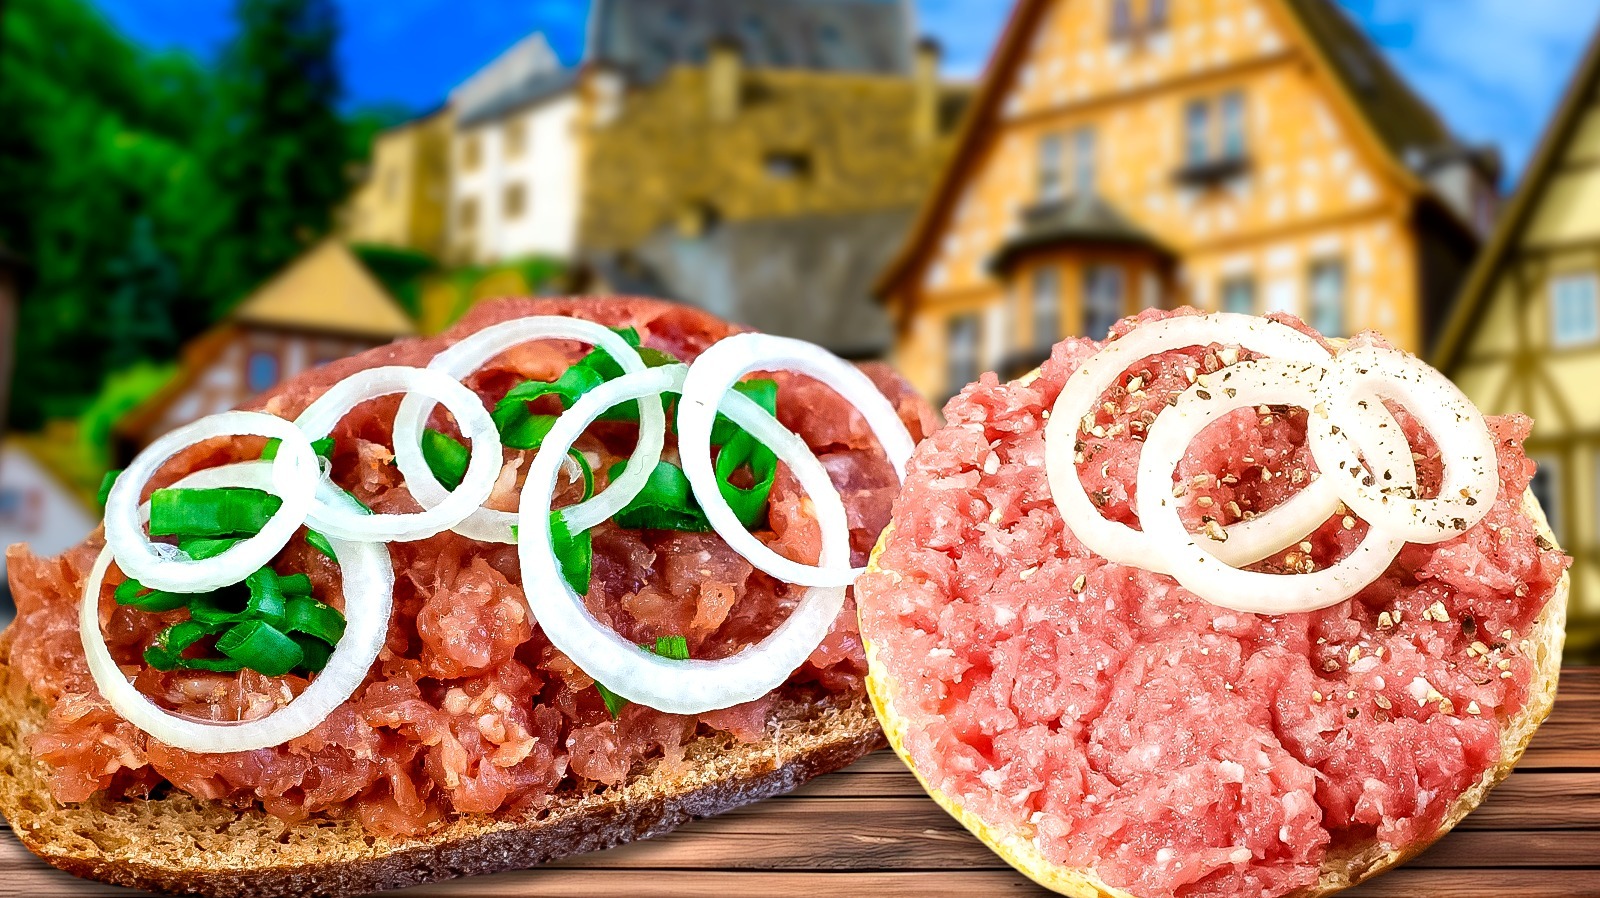 Germany's Raw Pork Sandwich Isn't As Scary As You Think